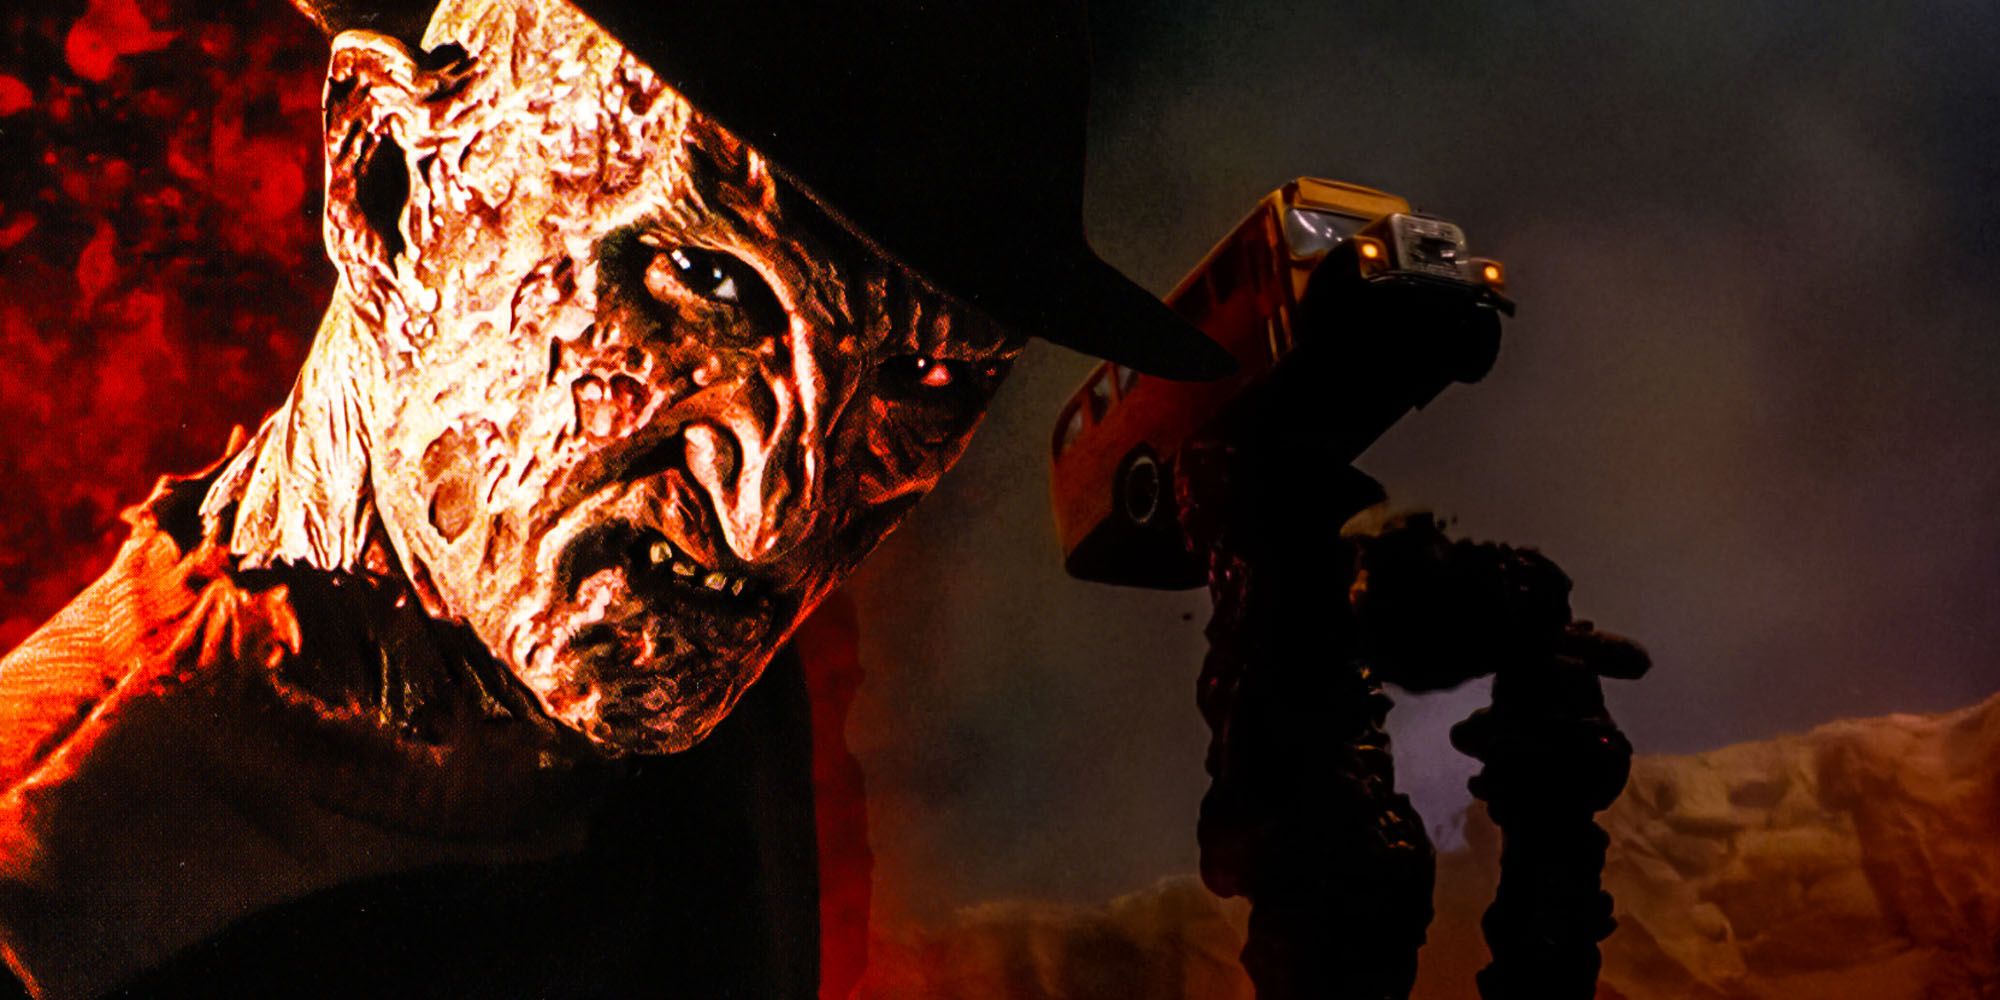 Nightmare on elm street 2 franchise most underrated opening